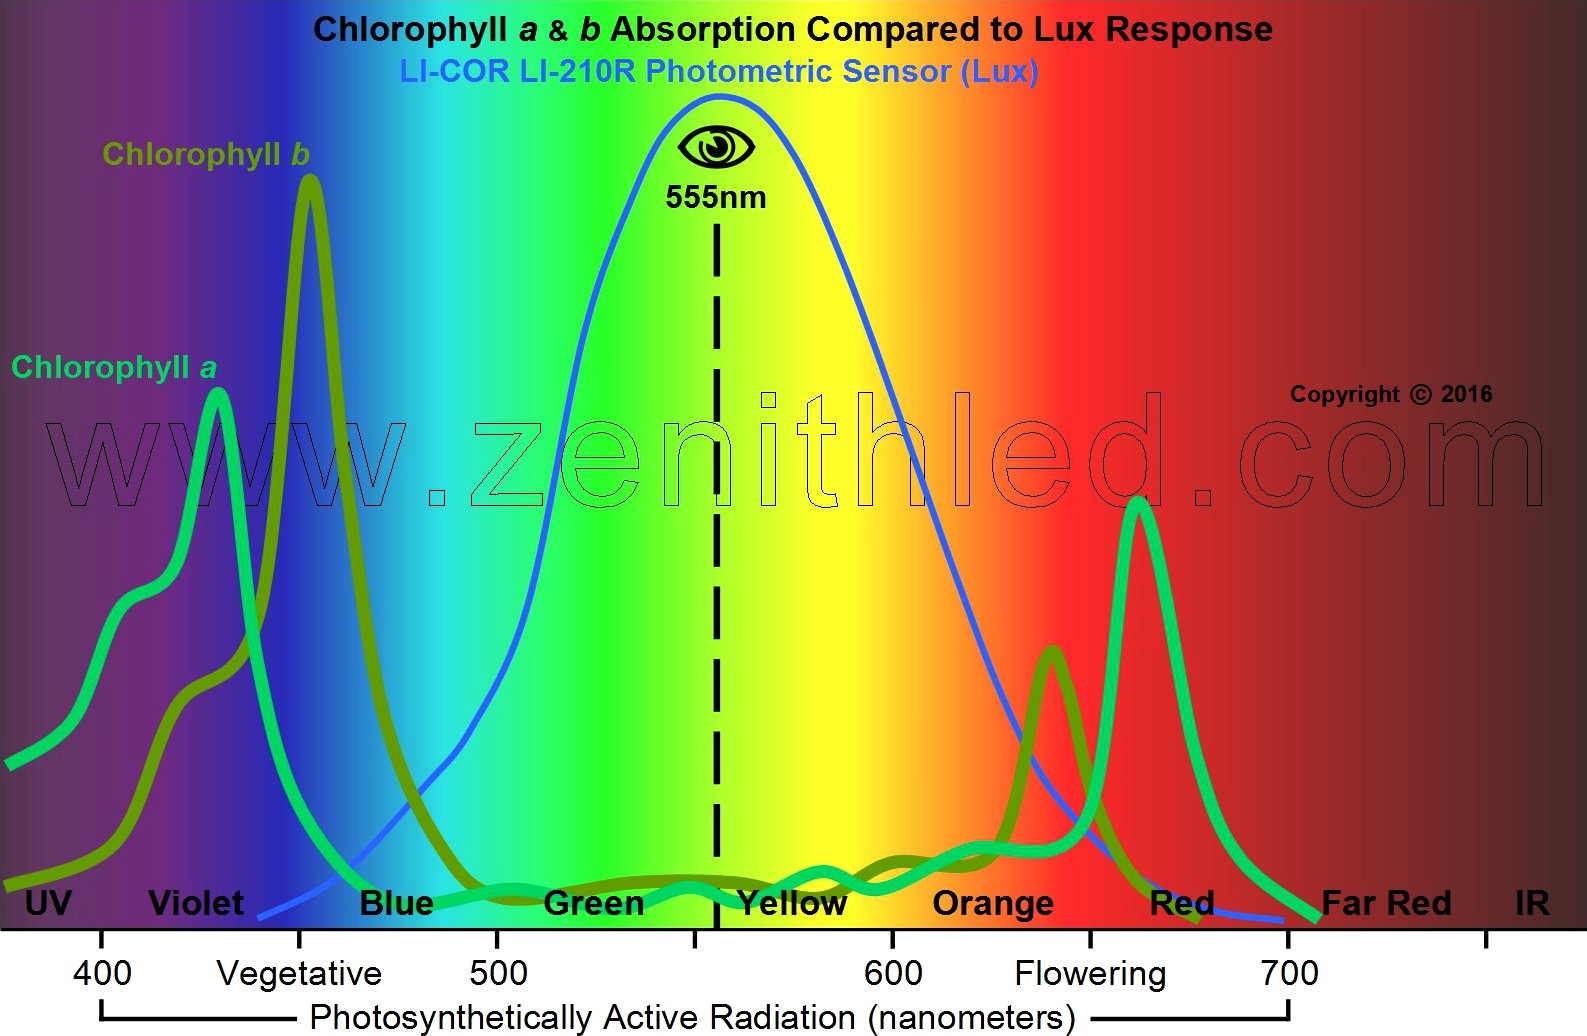 Blog-01-Chlorophyll-a-b-Compared-to-Lux-01.2.jpg